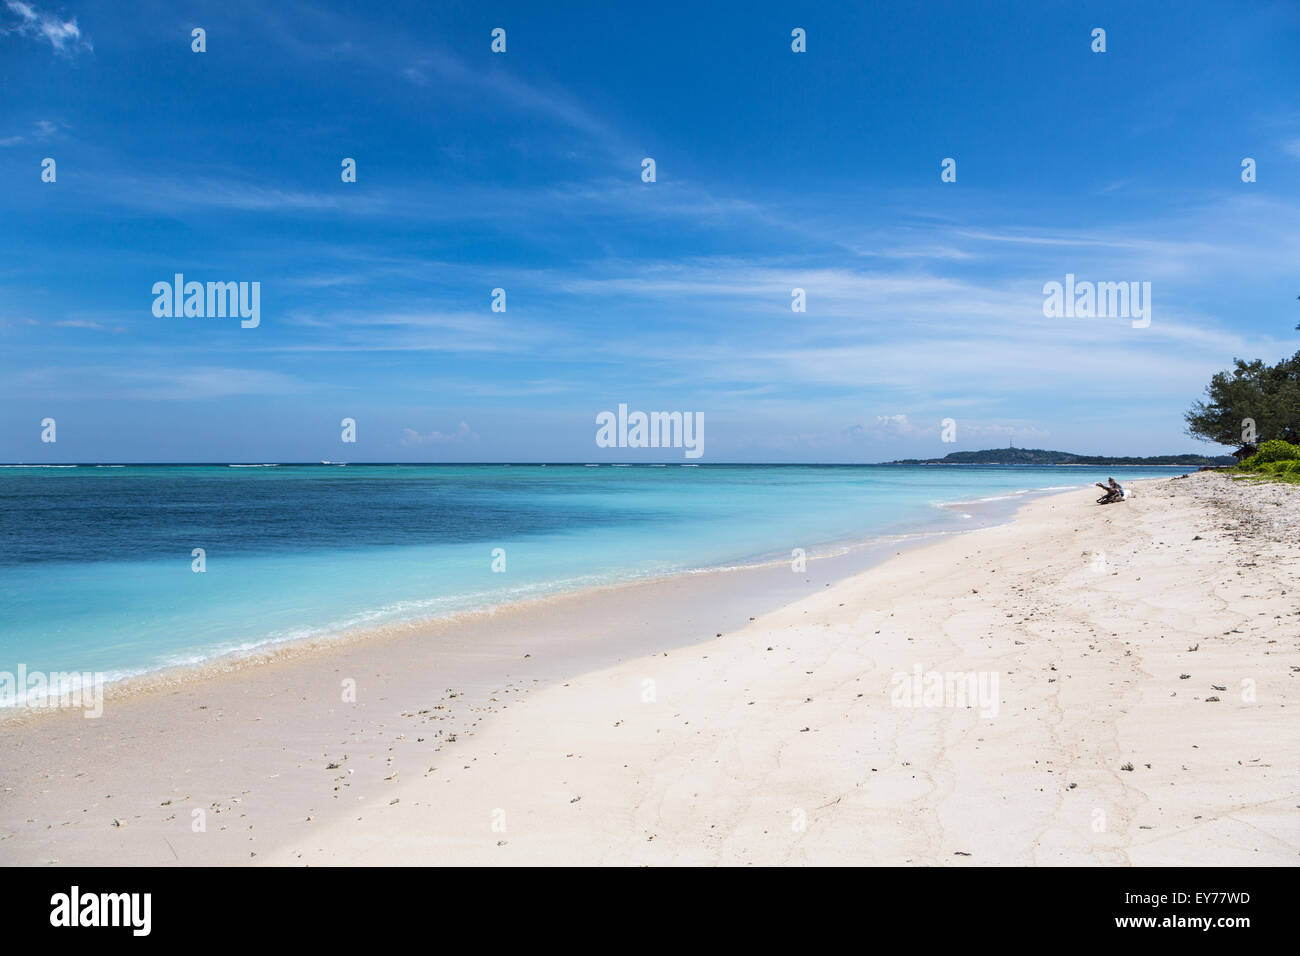 Gili Air is a tiny tropical island that lies just off the coast of Lombok in Indonesia. Stock Photo